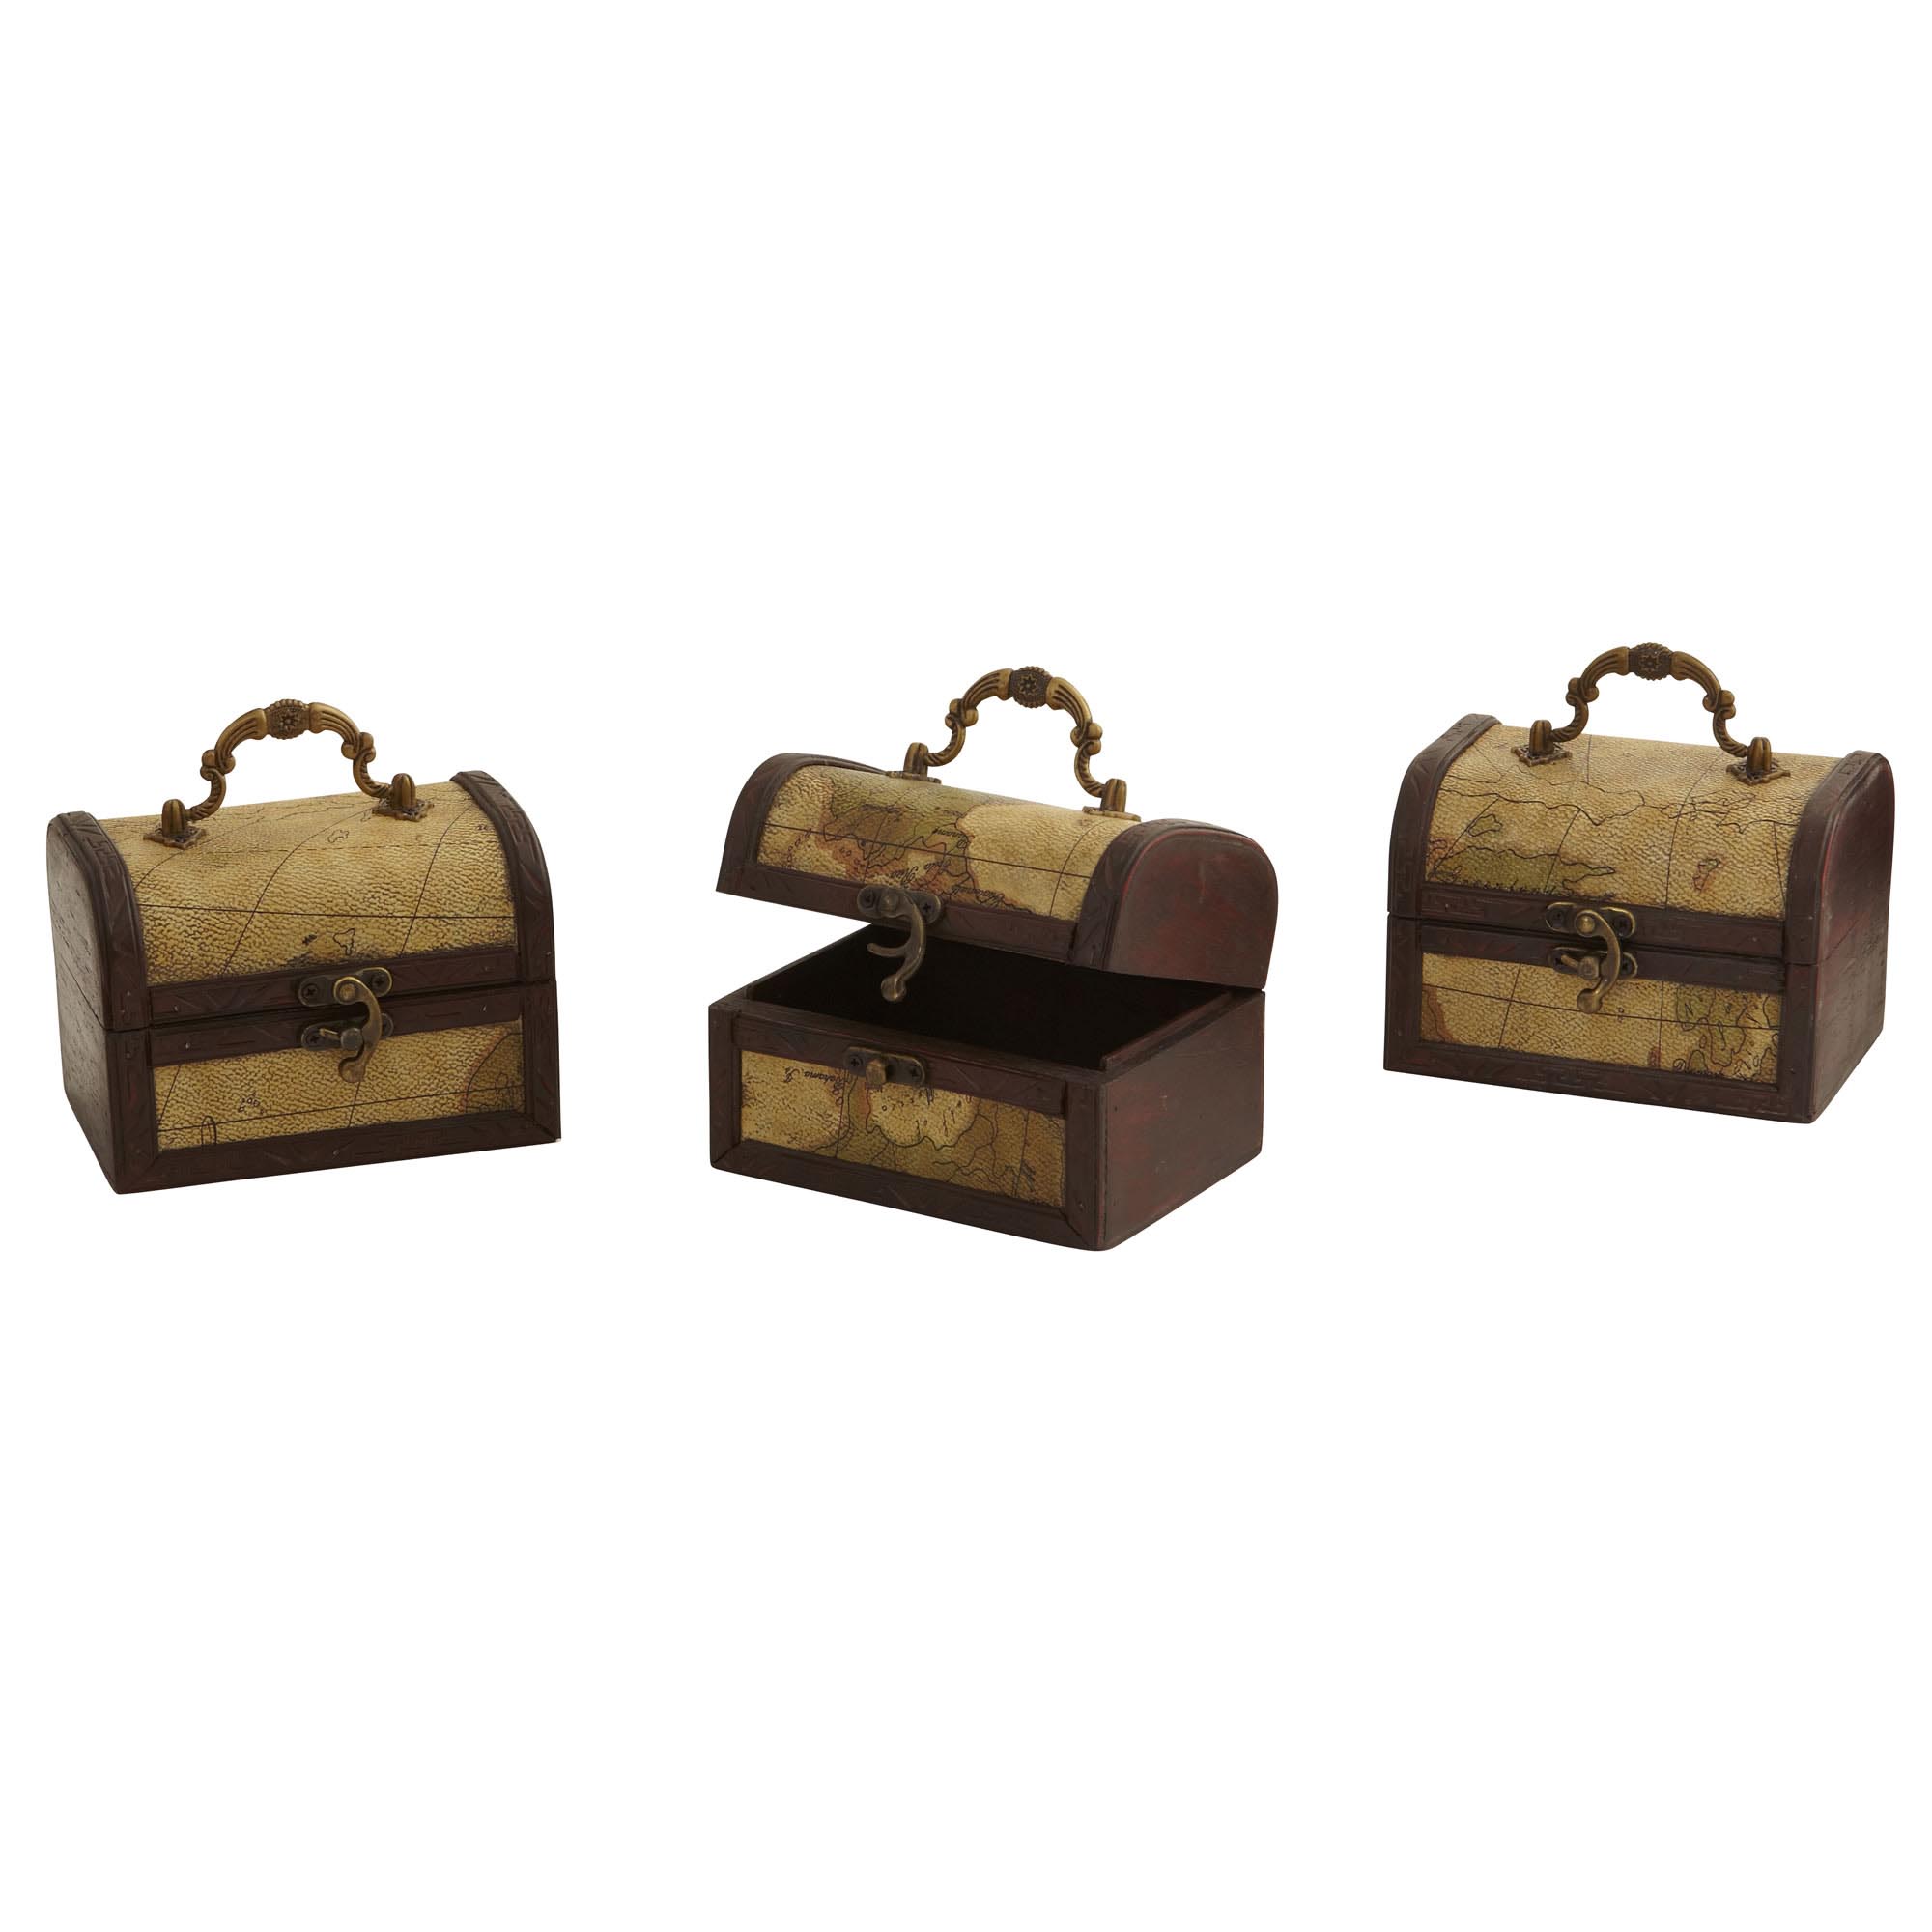 5 Inch Decorative Chest With Map (set Of 3)